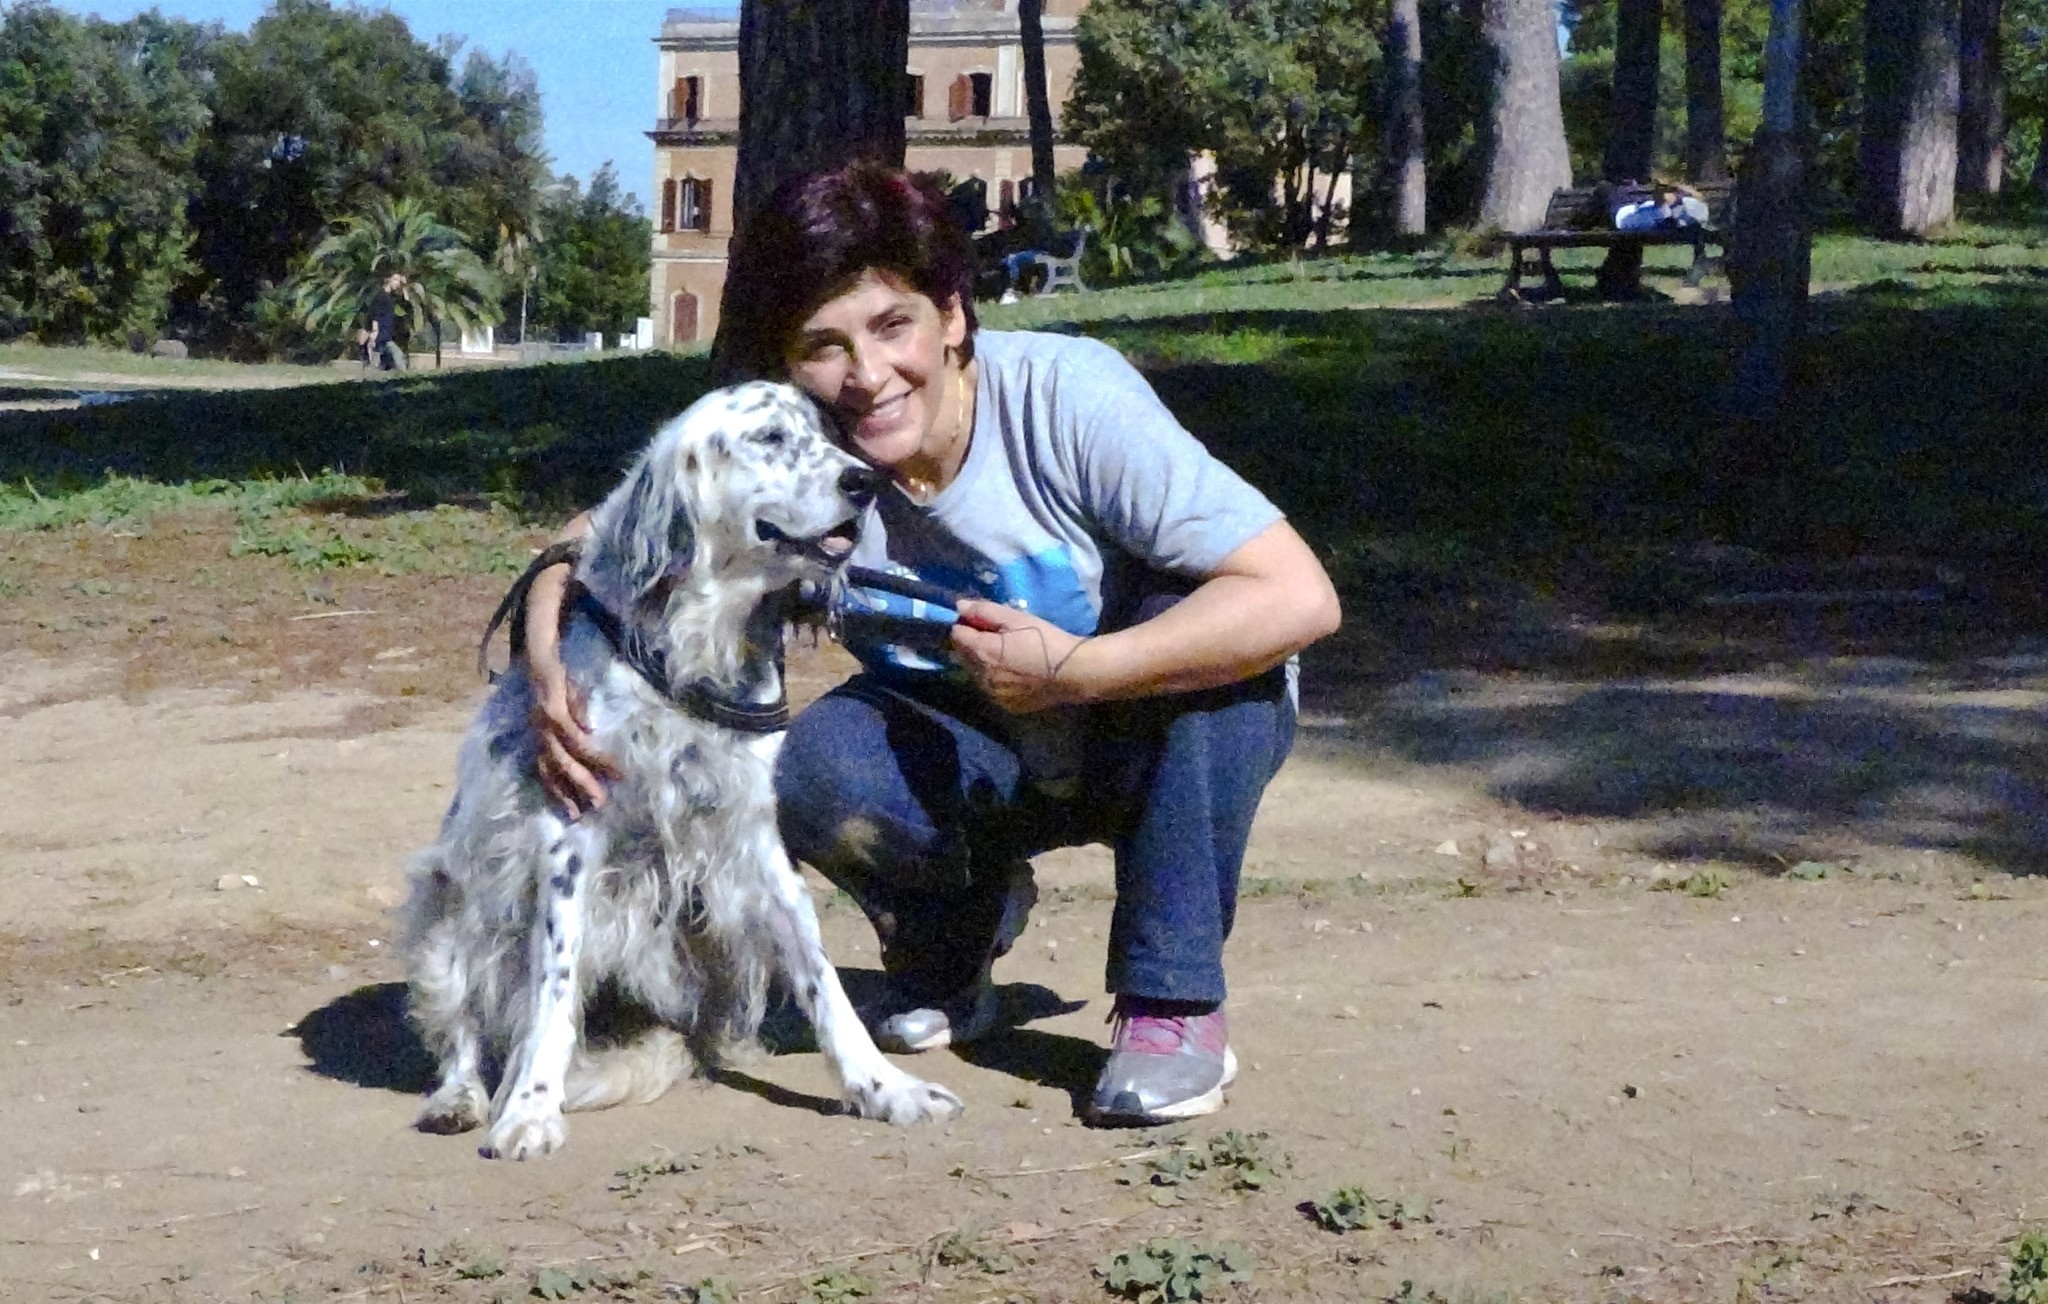 This undated photo made available Oct. 12, 2017, shows an Italian librarian who has won the right from her employer to use family sick leave to care for her ailing pet, posing with her dog Cucciola in a park in Rome. (AP Photo)